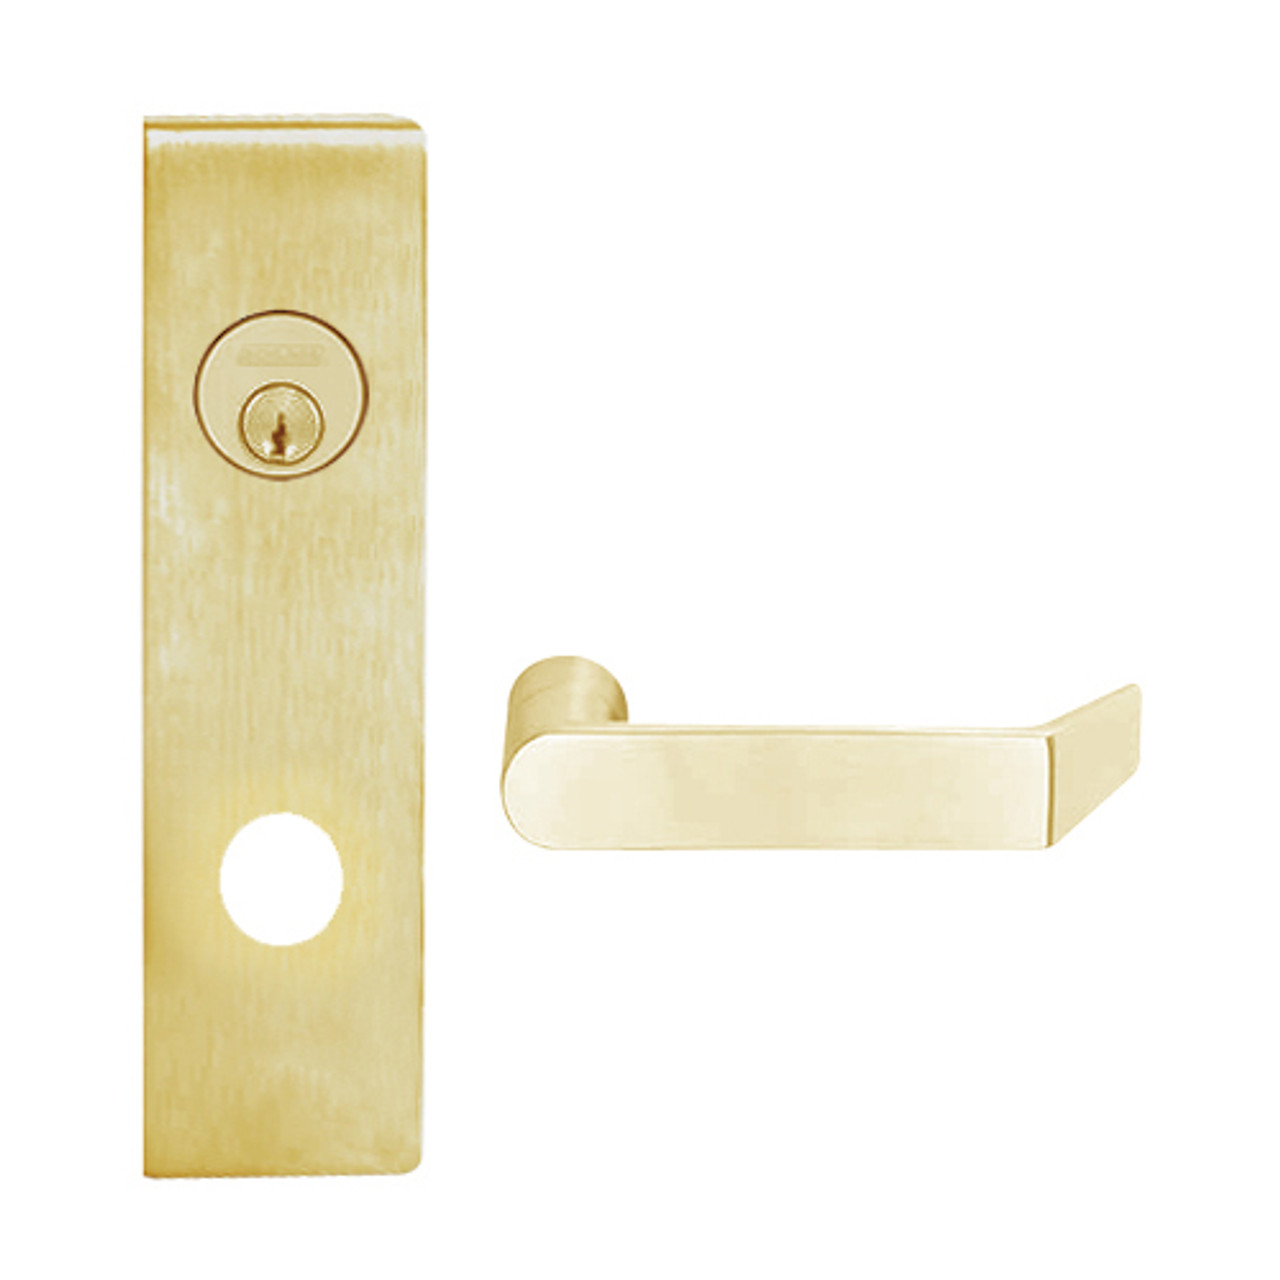 L9456L-06N-606 Schlage L Series Less Cylinder Corridor with Deadbolt Commercial Mortise Lock with 06 Cast Lever Design in Satin Brass